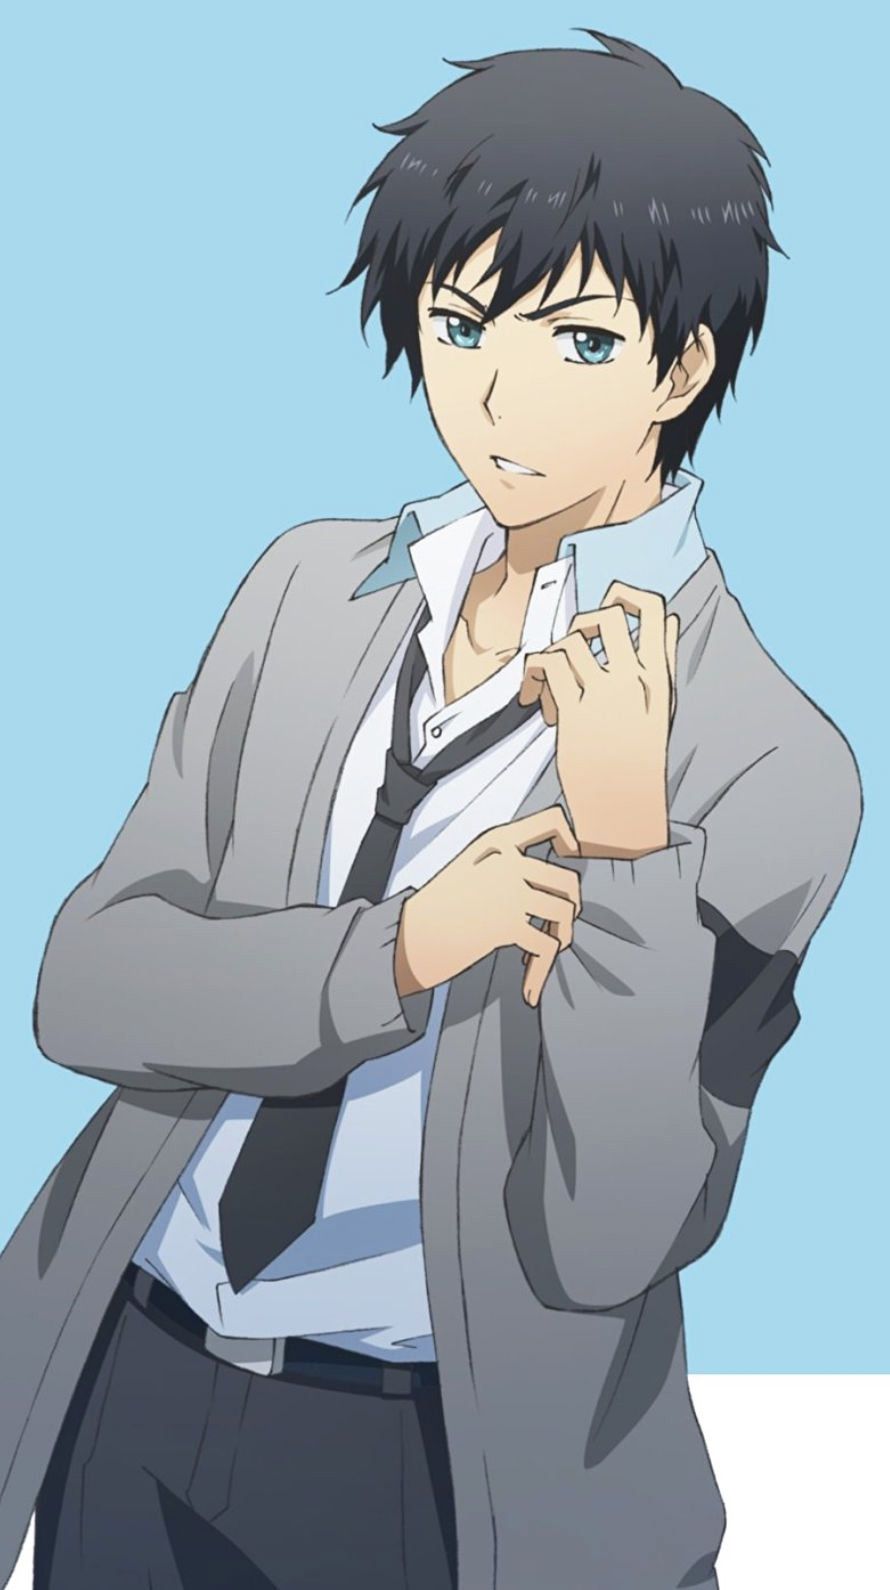 ReLIFE-iPhone壁紙